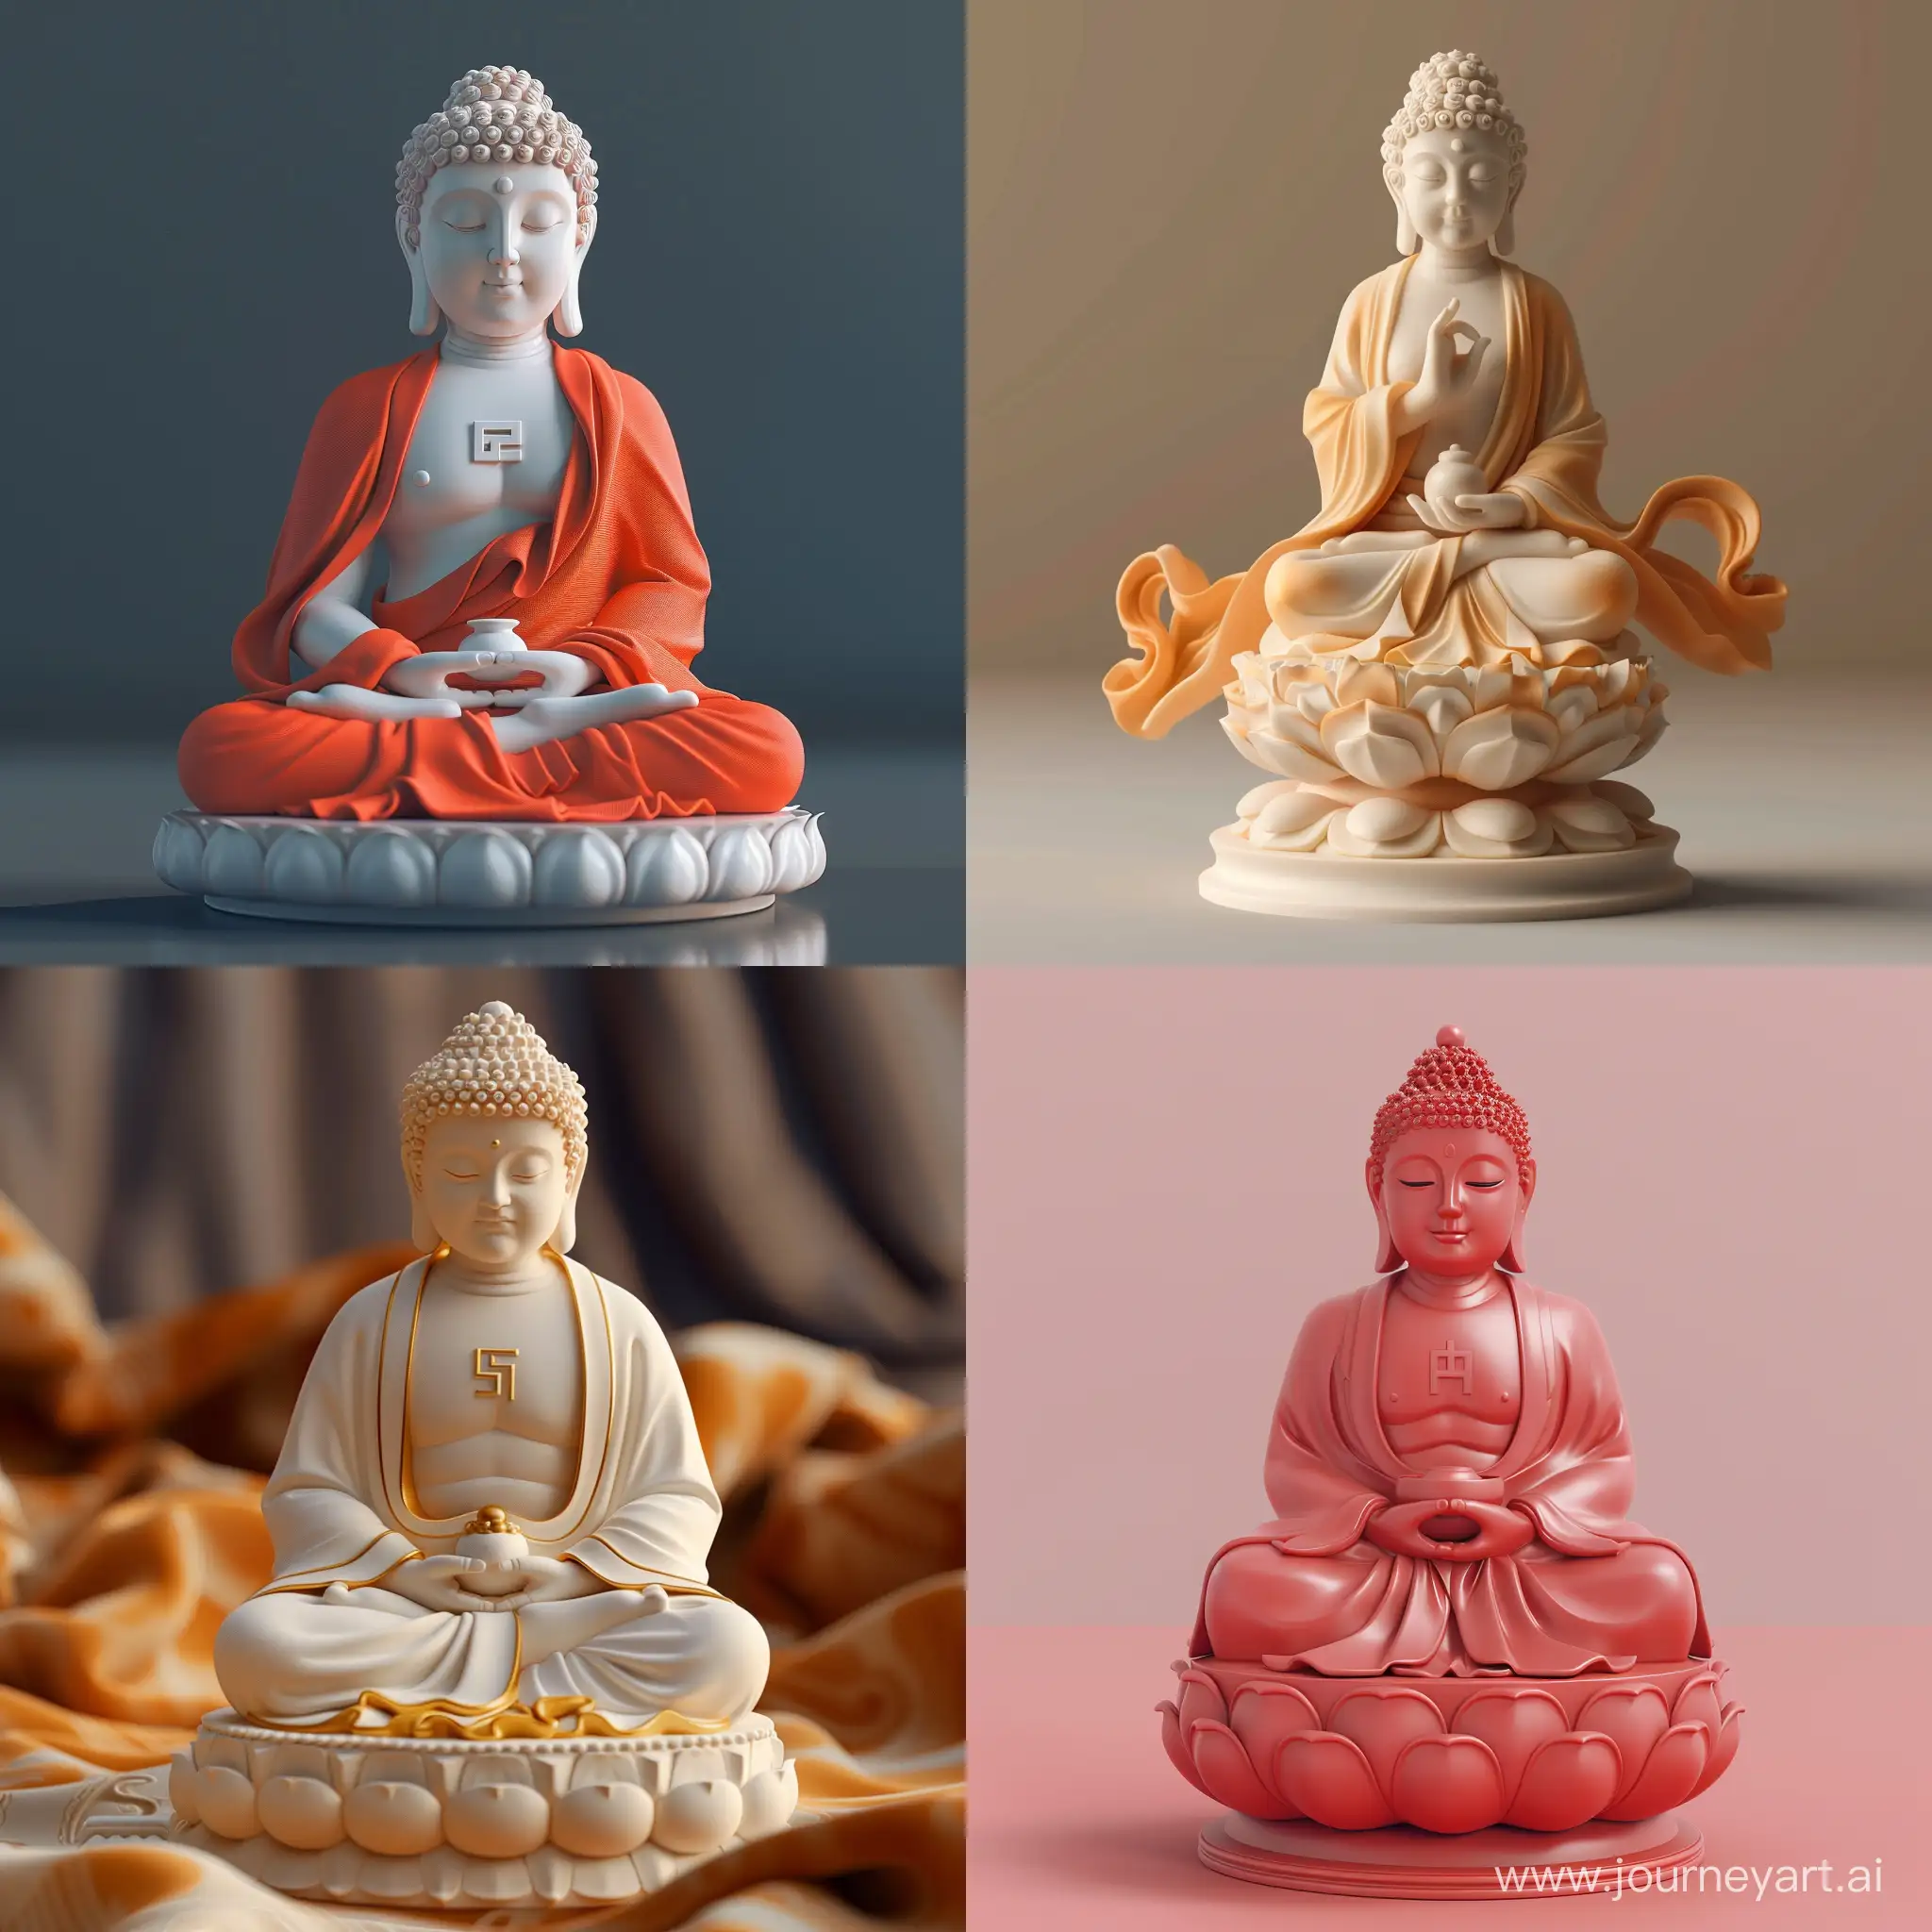 this figurine of buddha, in the style of ethereal abstraction, luxurious drapery, translucent immersion, porcelain, vray, burne-jones, miniature illumination, in flat style, high quality vector style